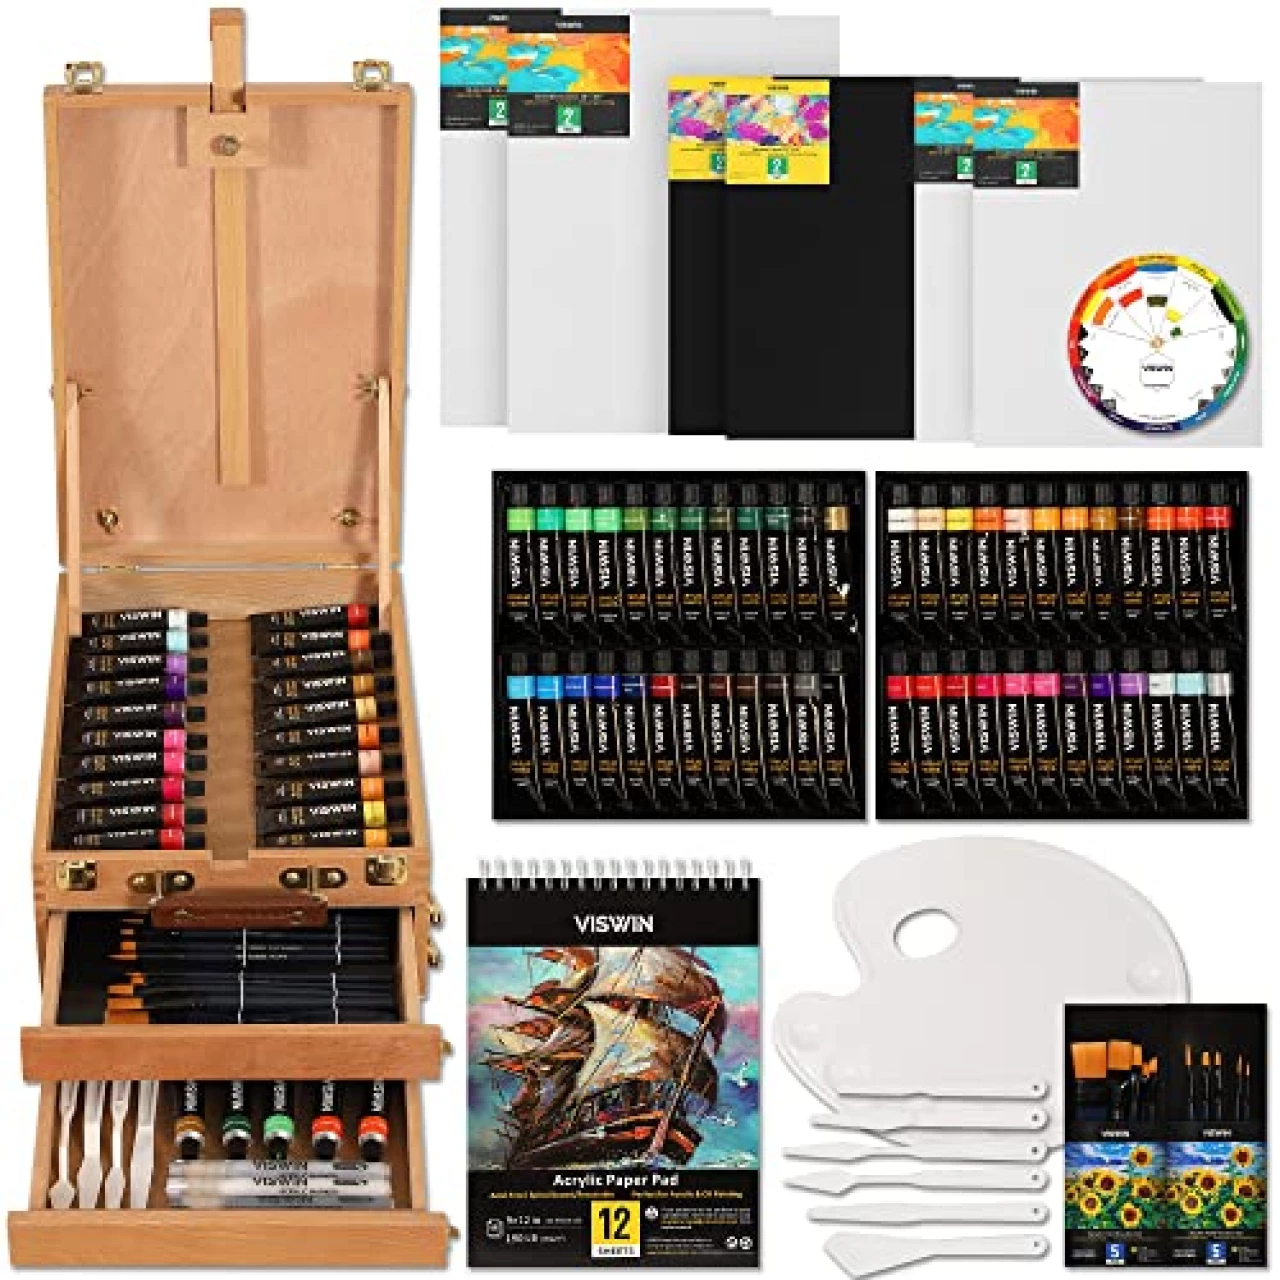 VISWIN 74 Pcs Premium Acrylic Painting Set, Painting Kit with Tabletop Sketch Box, 48 Colors Acrylic Paints, Canvas Panels, Nylon Paint Brushes, and Some Other Supplies, for Adults, Beginners, Artists